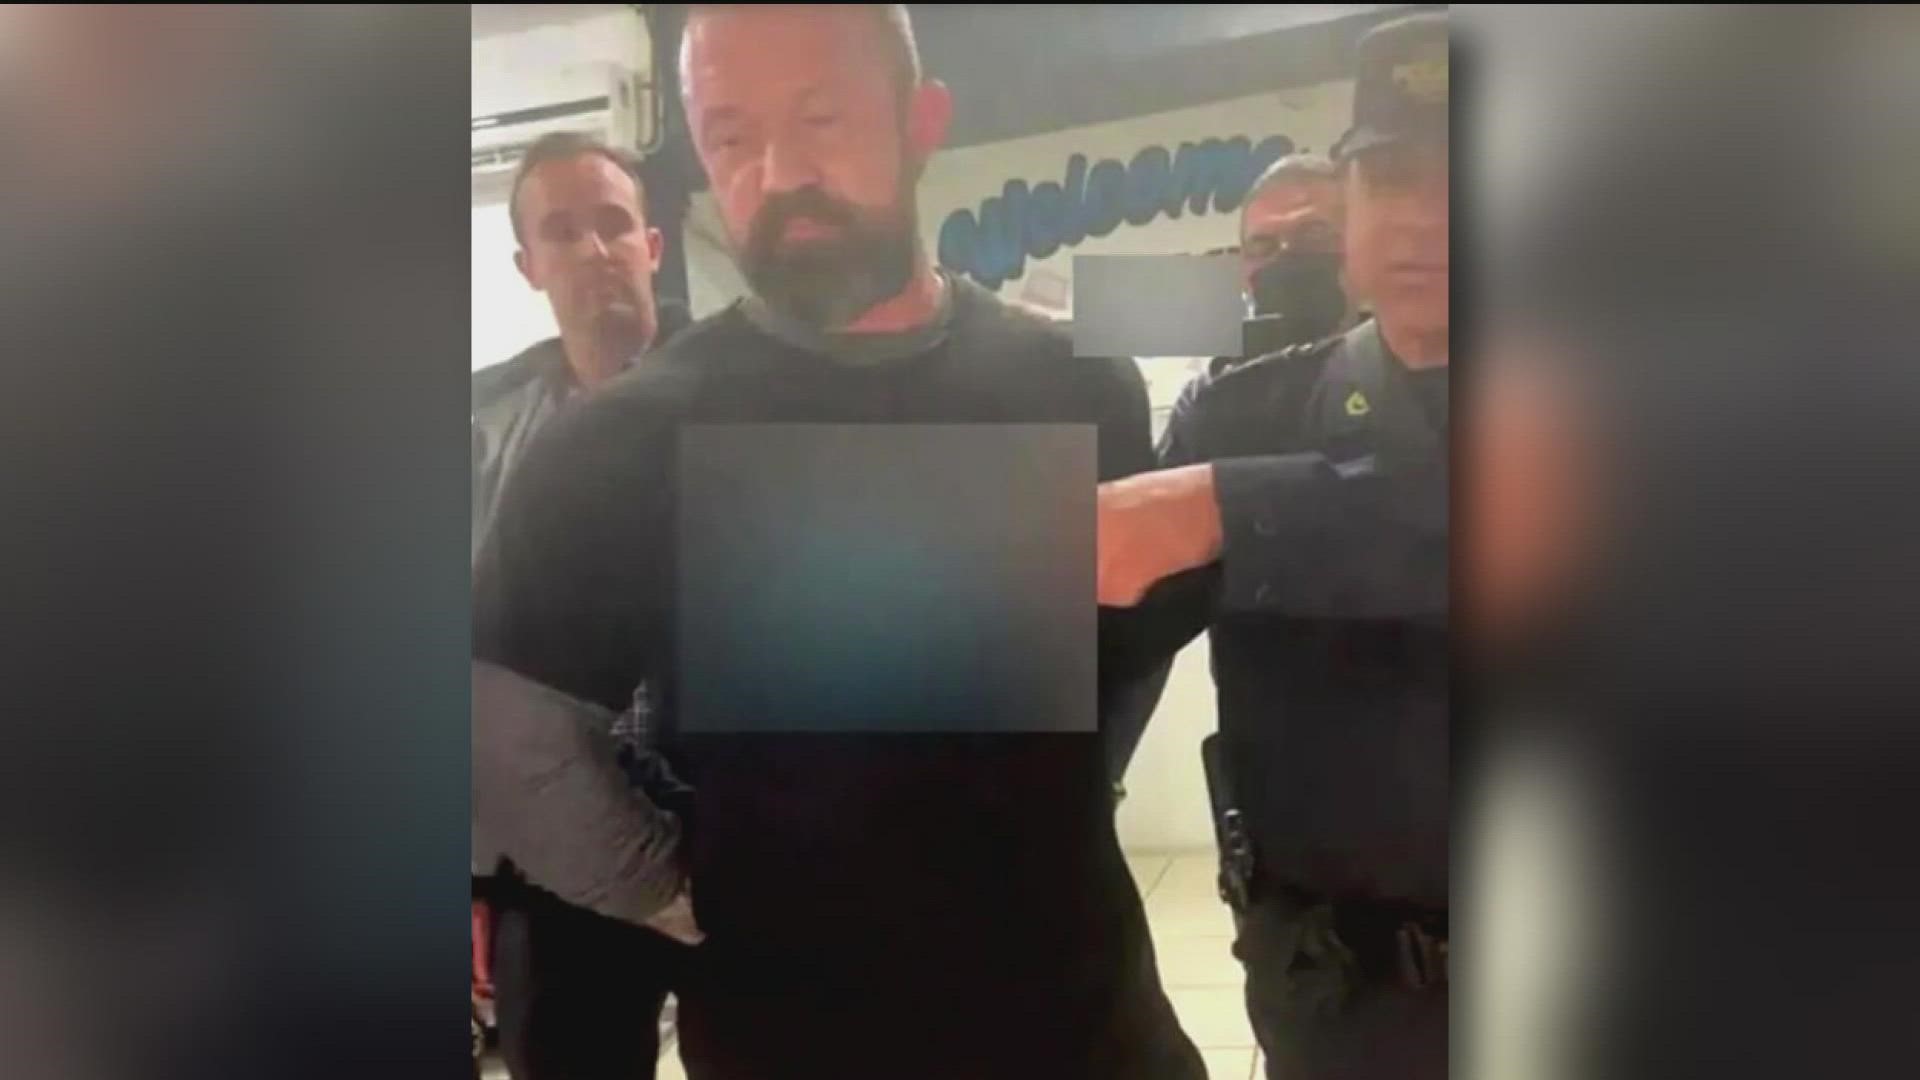 The US Marshals confirmed to CBS 8 that McLeod was arrested on Monday morning by El Salvadorian authorities along with US Marshals from San Diego.